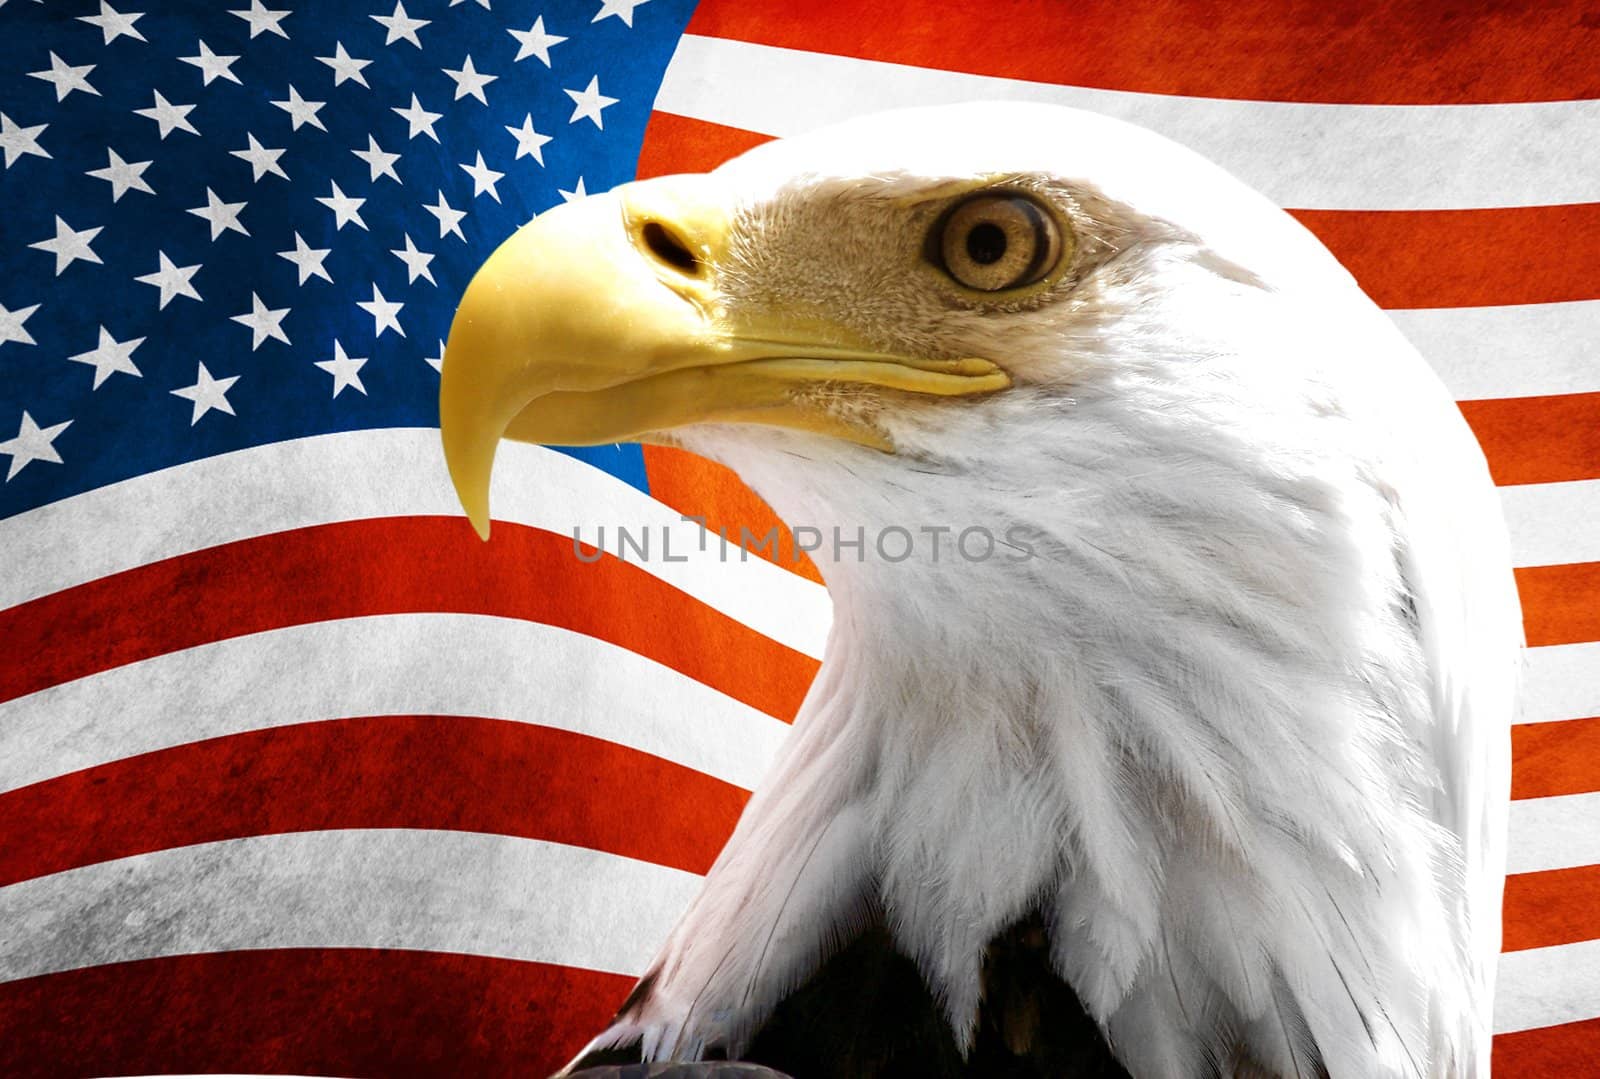 Double exposure: Bald Eagle in the foreground with the American flag blurred in the background.